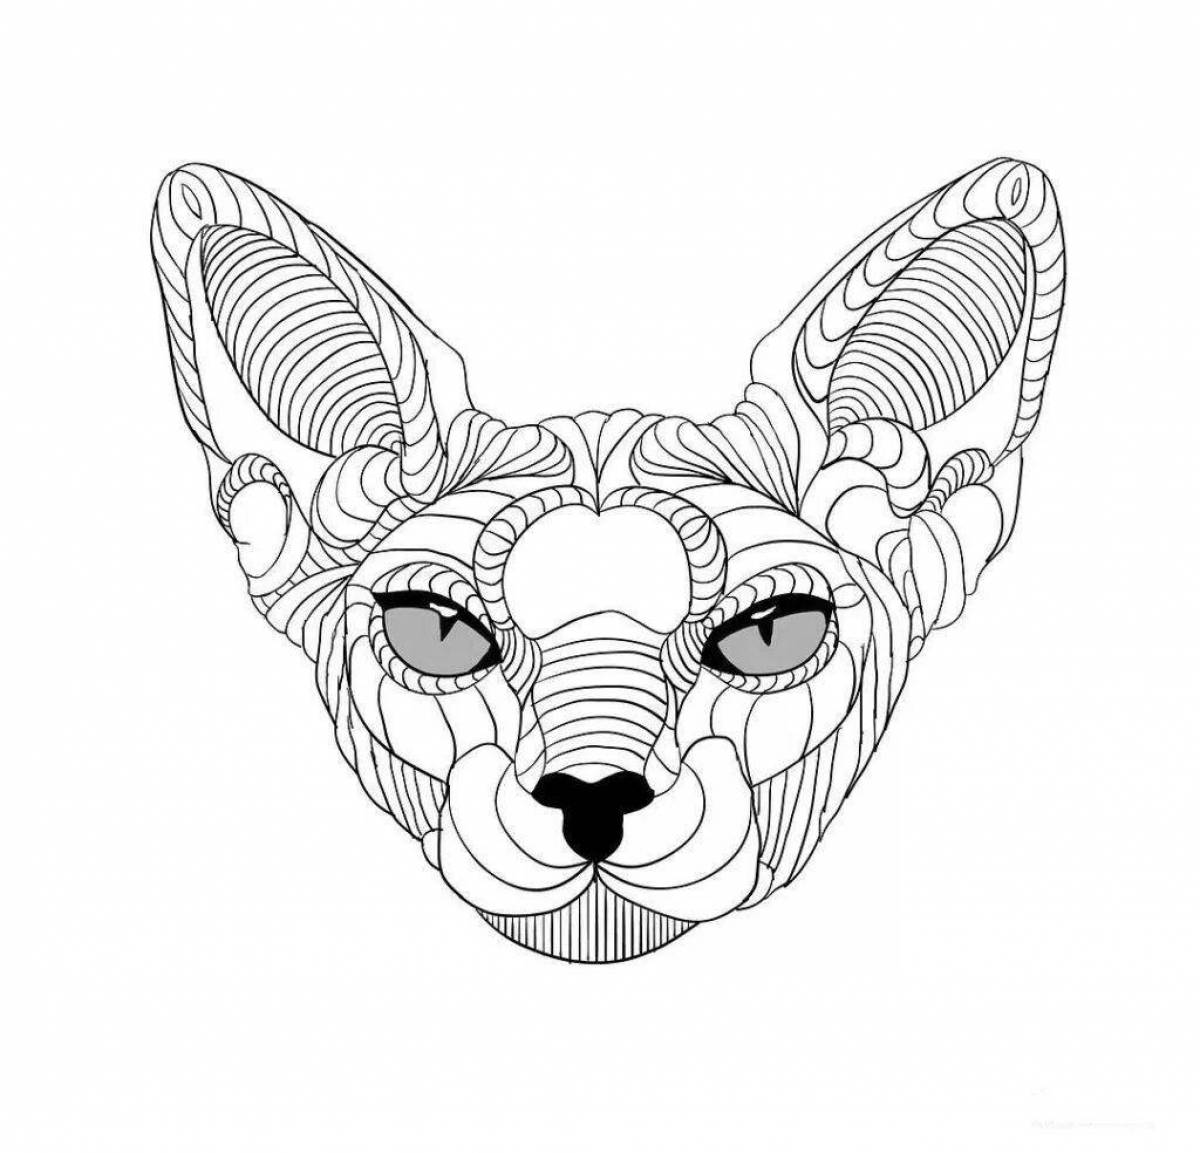 Cunning sphinx coloring page